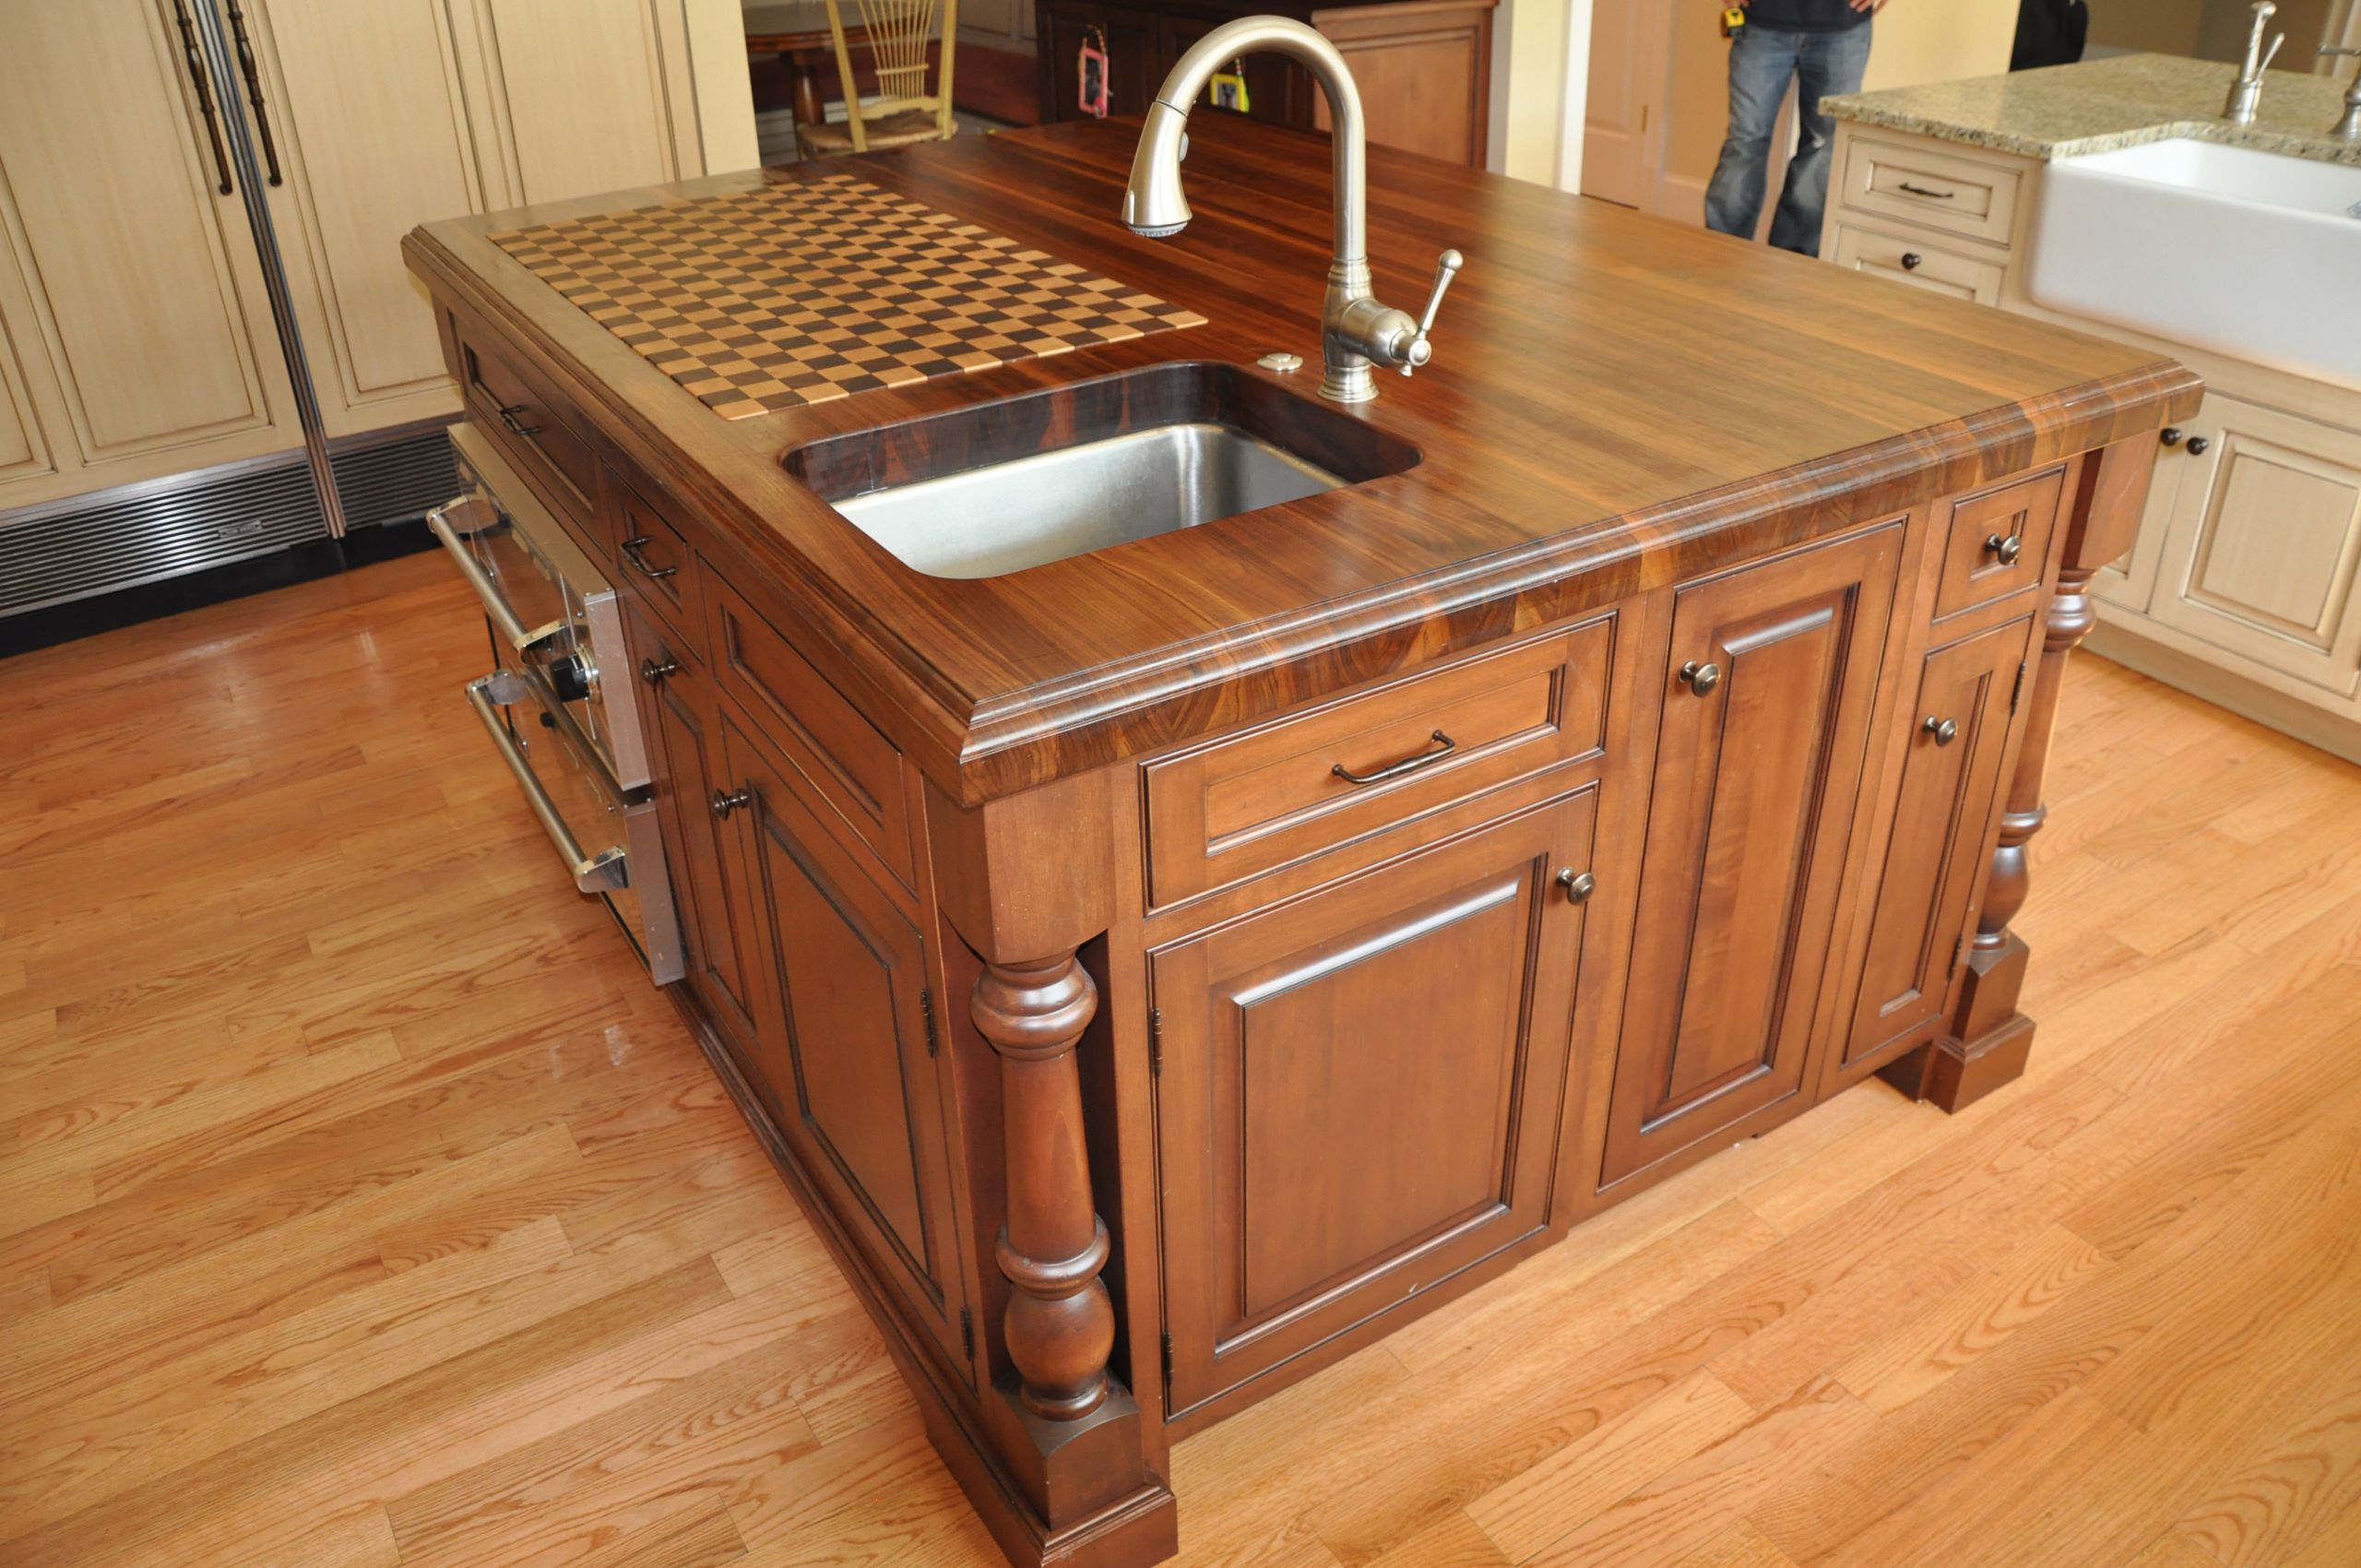 Kitchen Cabinets And Islands
 Ideas for Creating Custom Kitchen Islands Cabinets by Graber